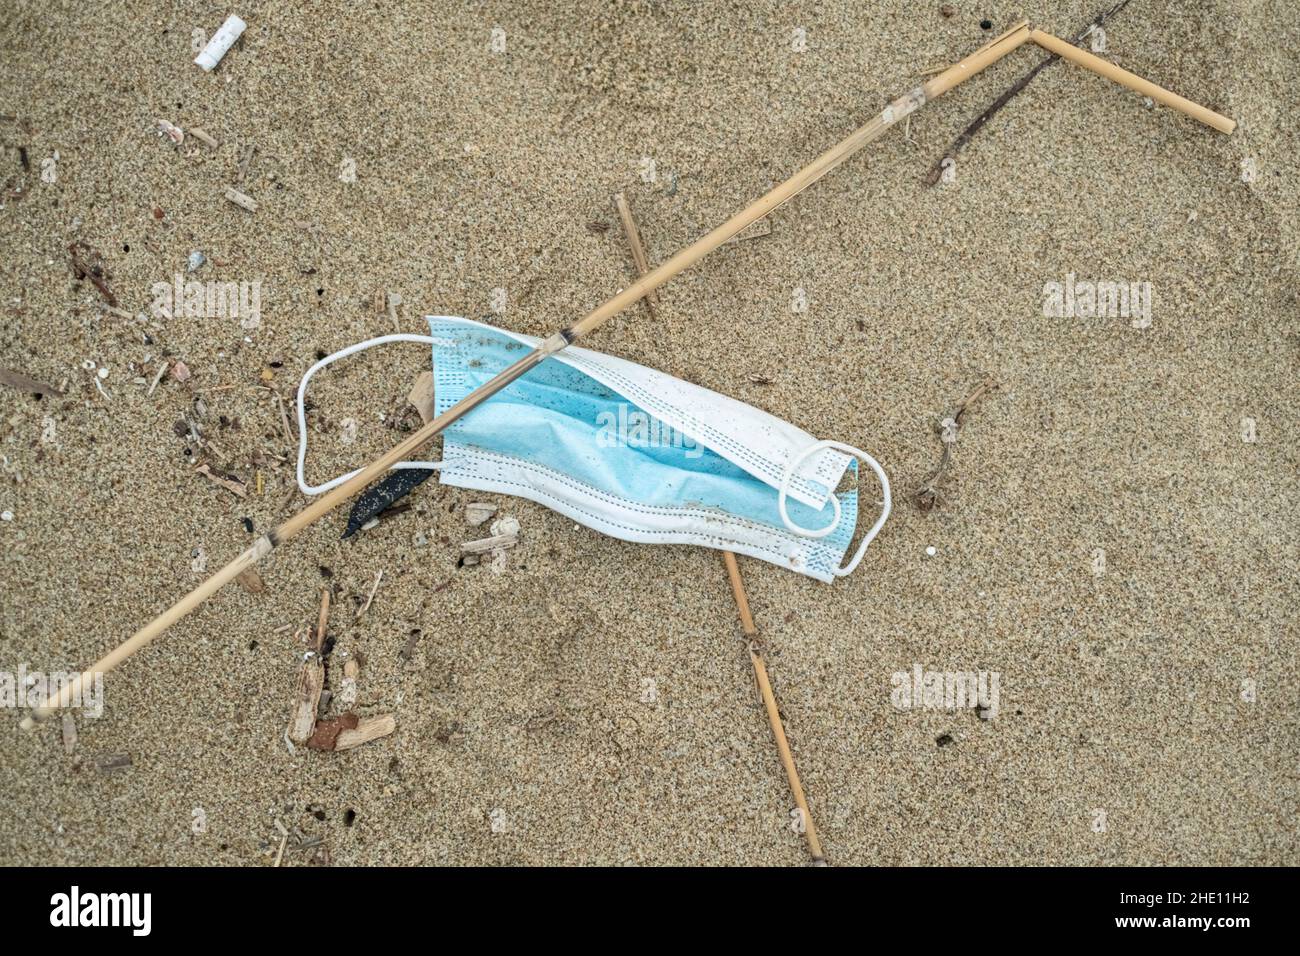 Used surgical face mask discarded on sea coast ecosystem,covid19 pandemic disease pollution waste Stock Photo